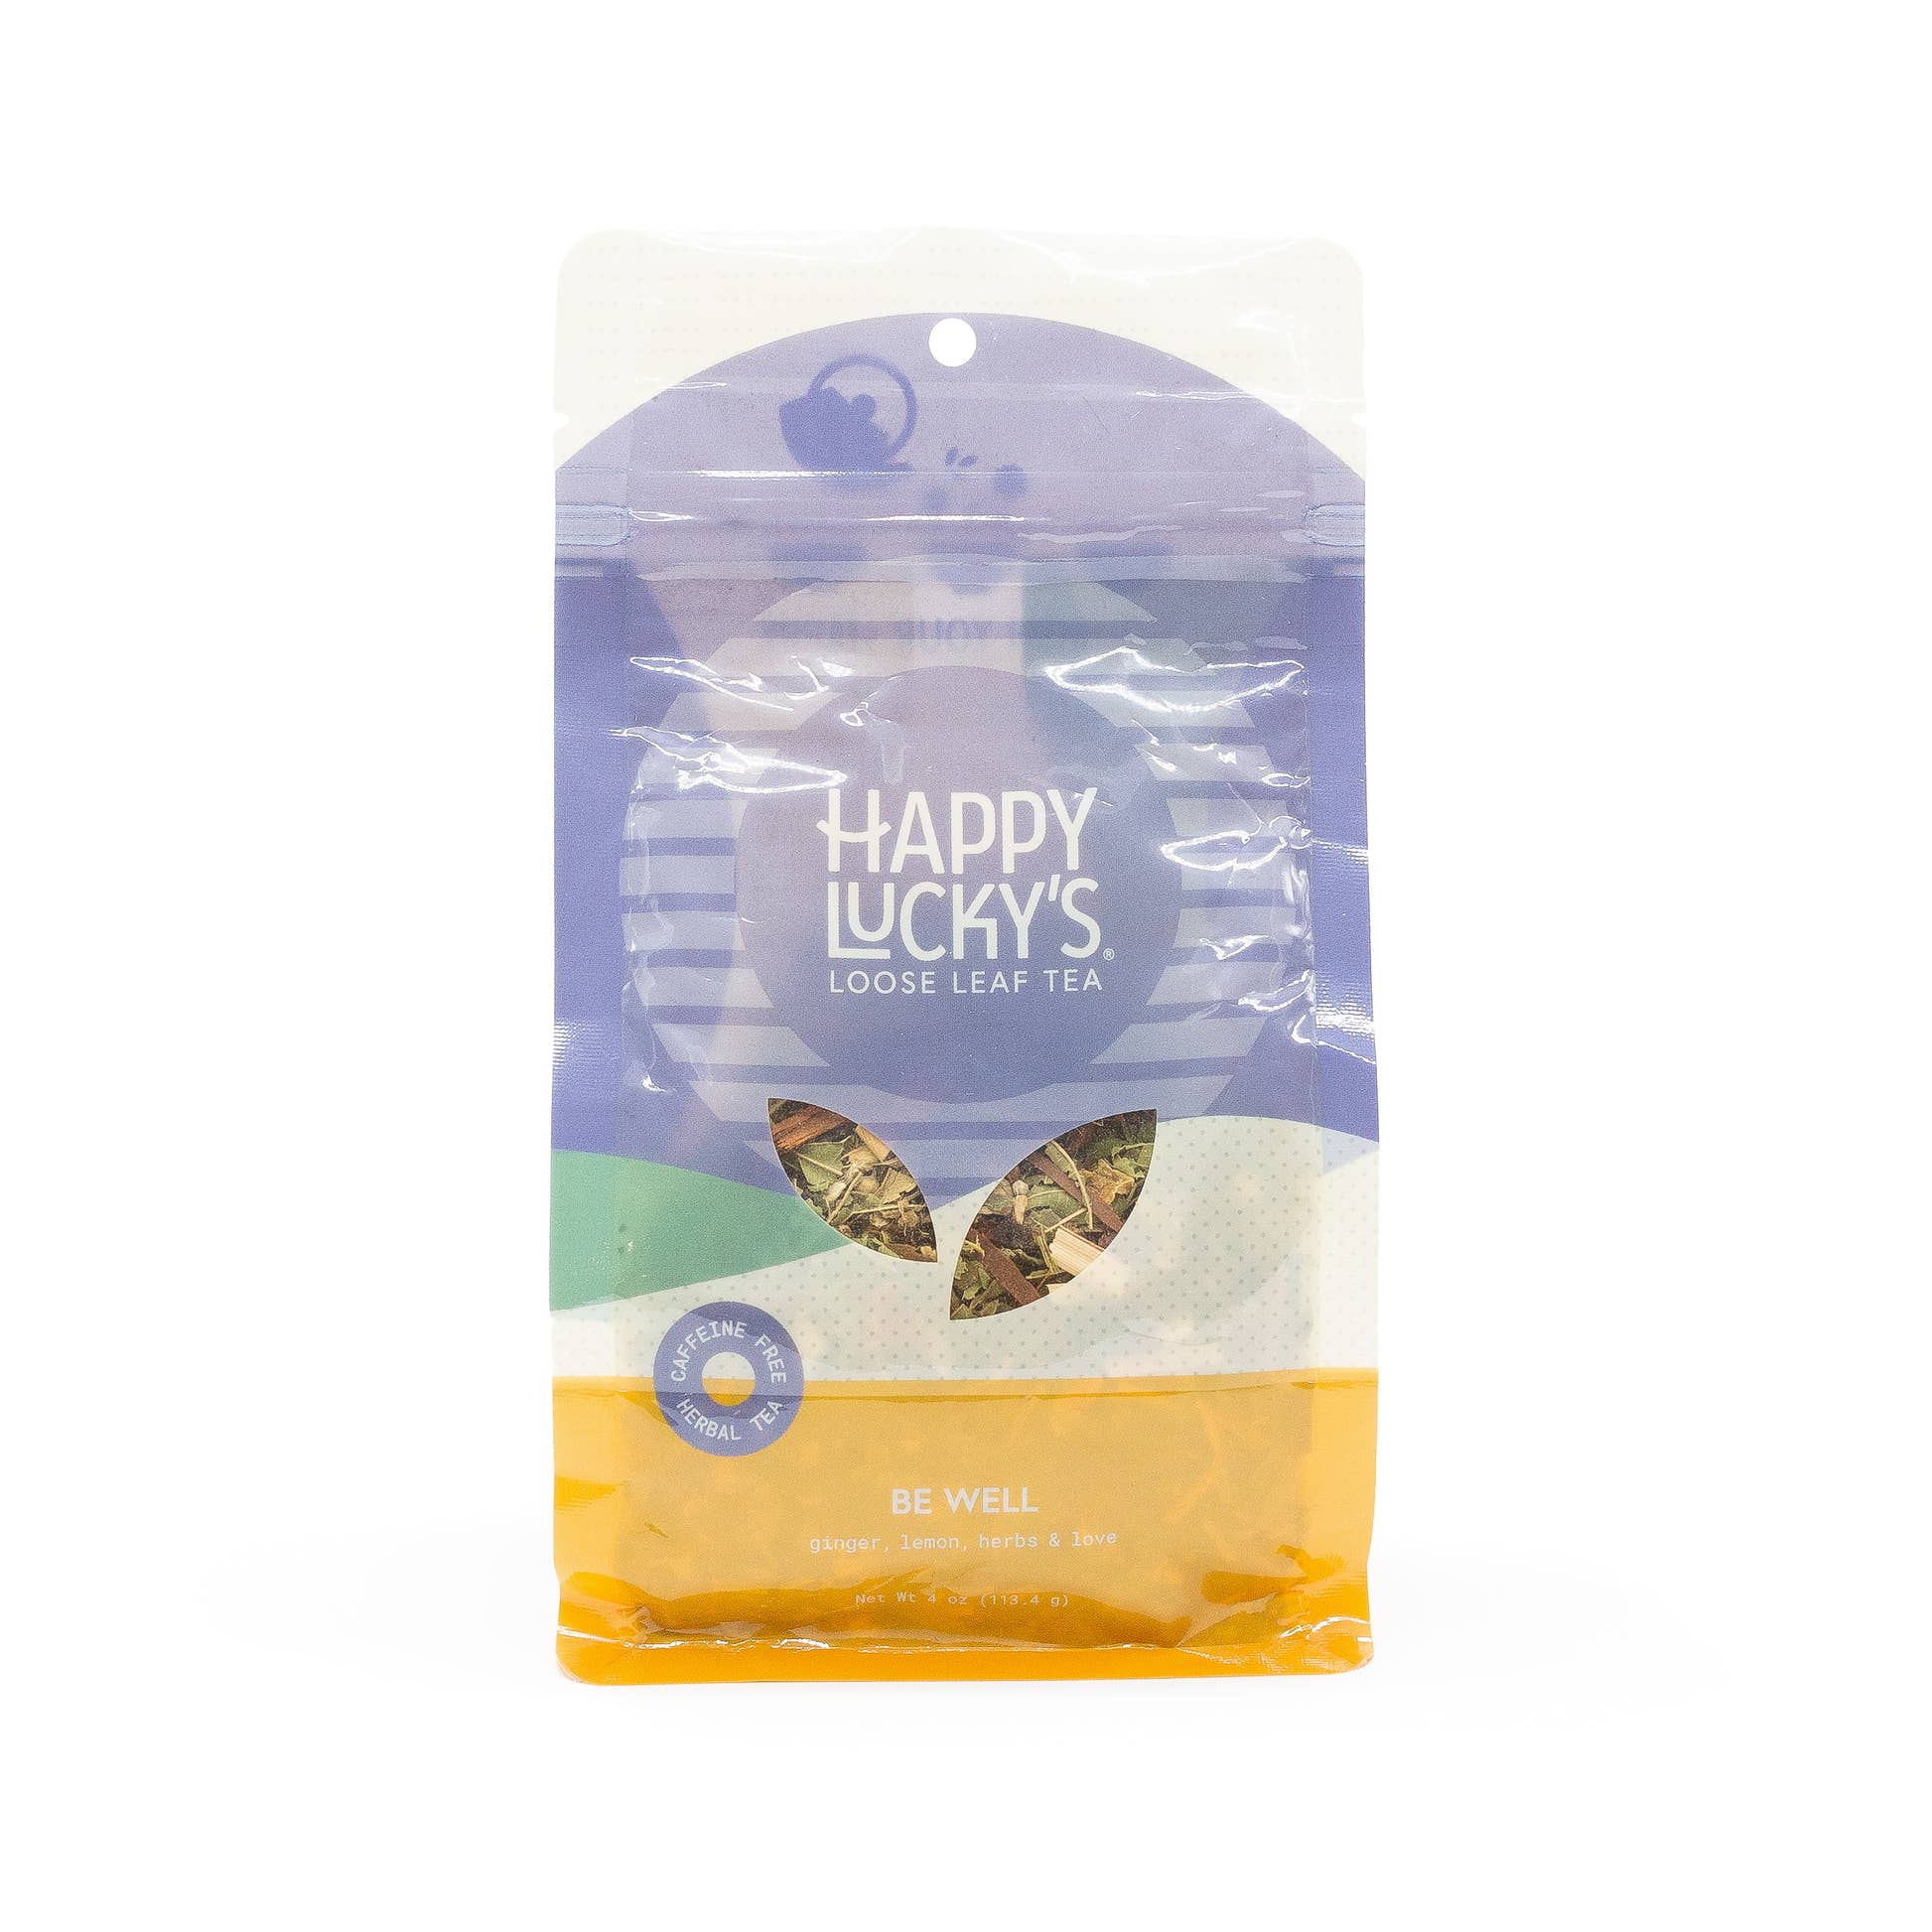 Be Well by Happy Lucky's loose leaf herbal tea package